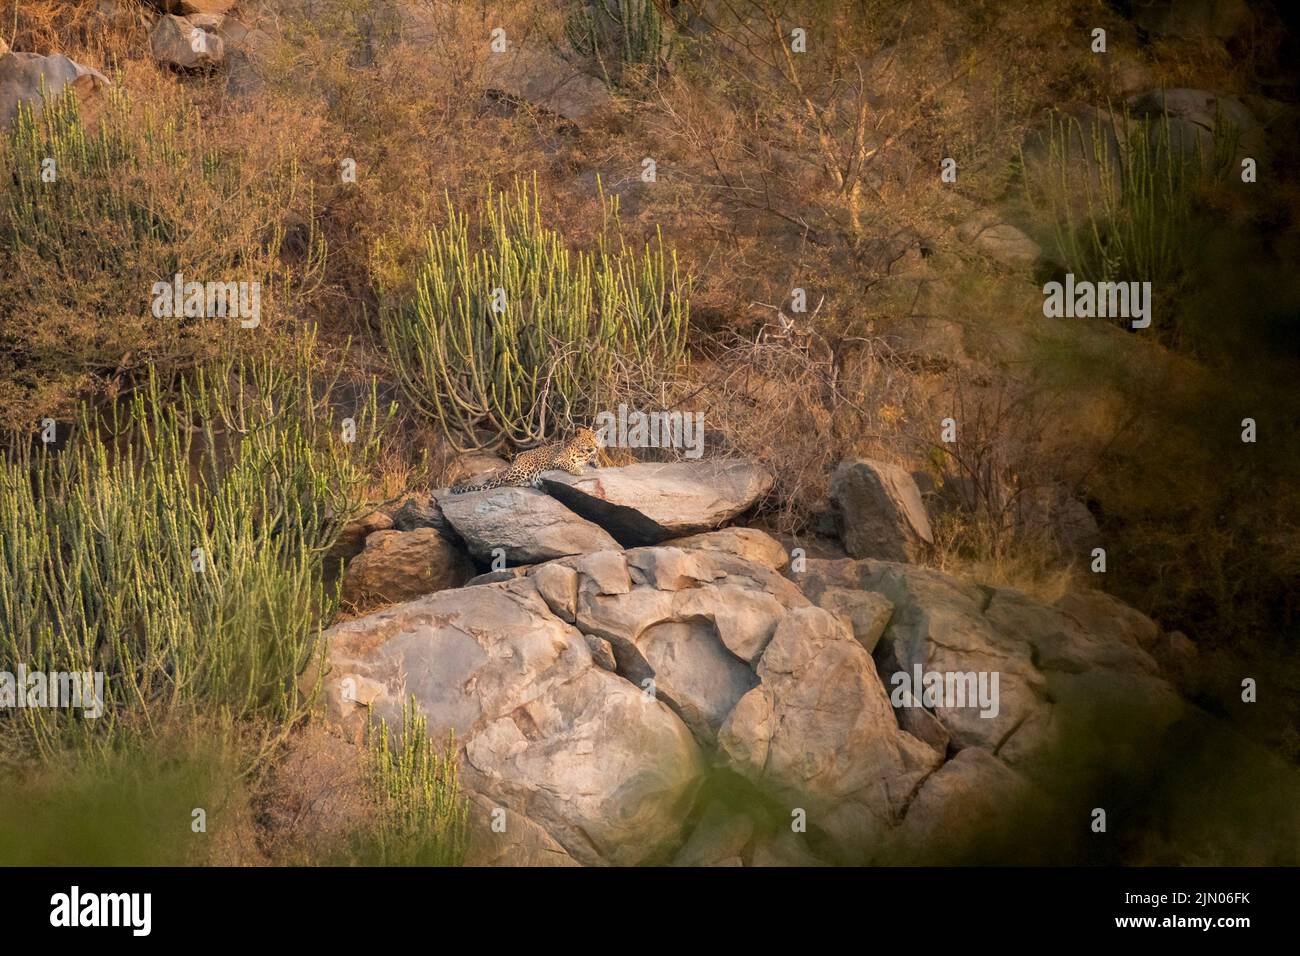 wild leopard or panther resting on big rock with scenic landscape view and habitat at hill or mountains in outdoor wildlife safari at forest reserve Stock Photo